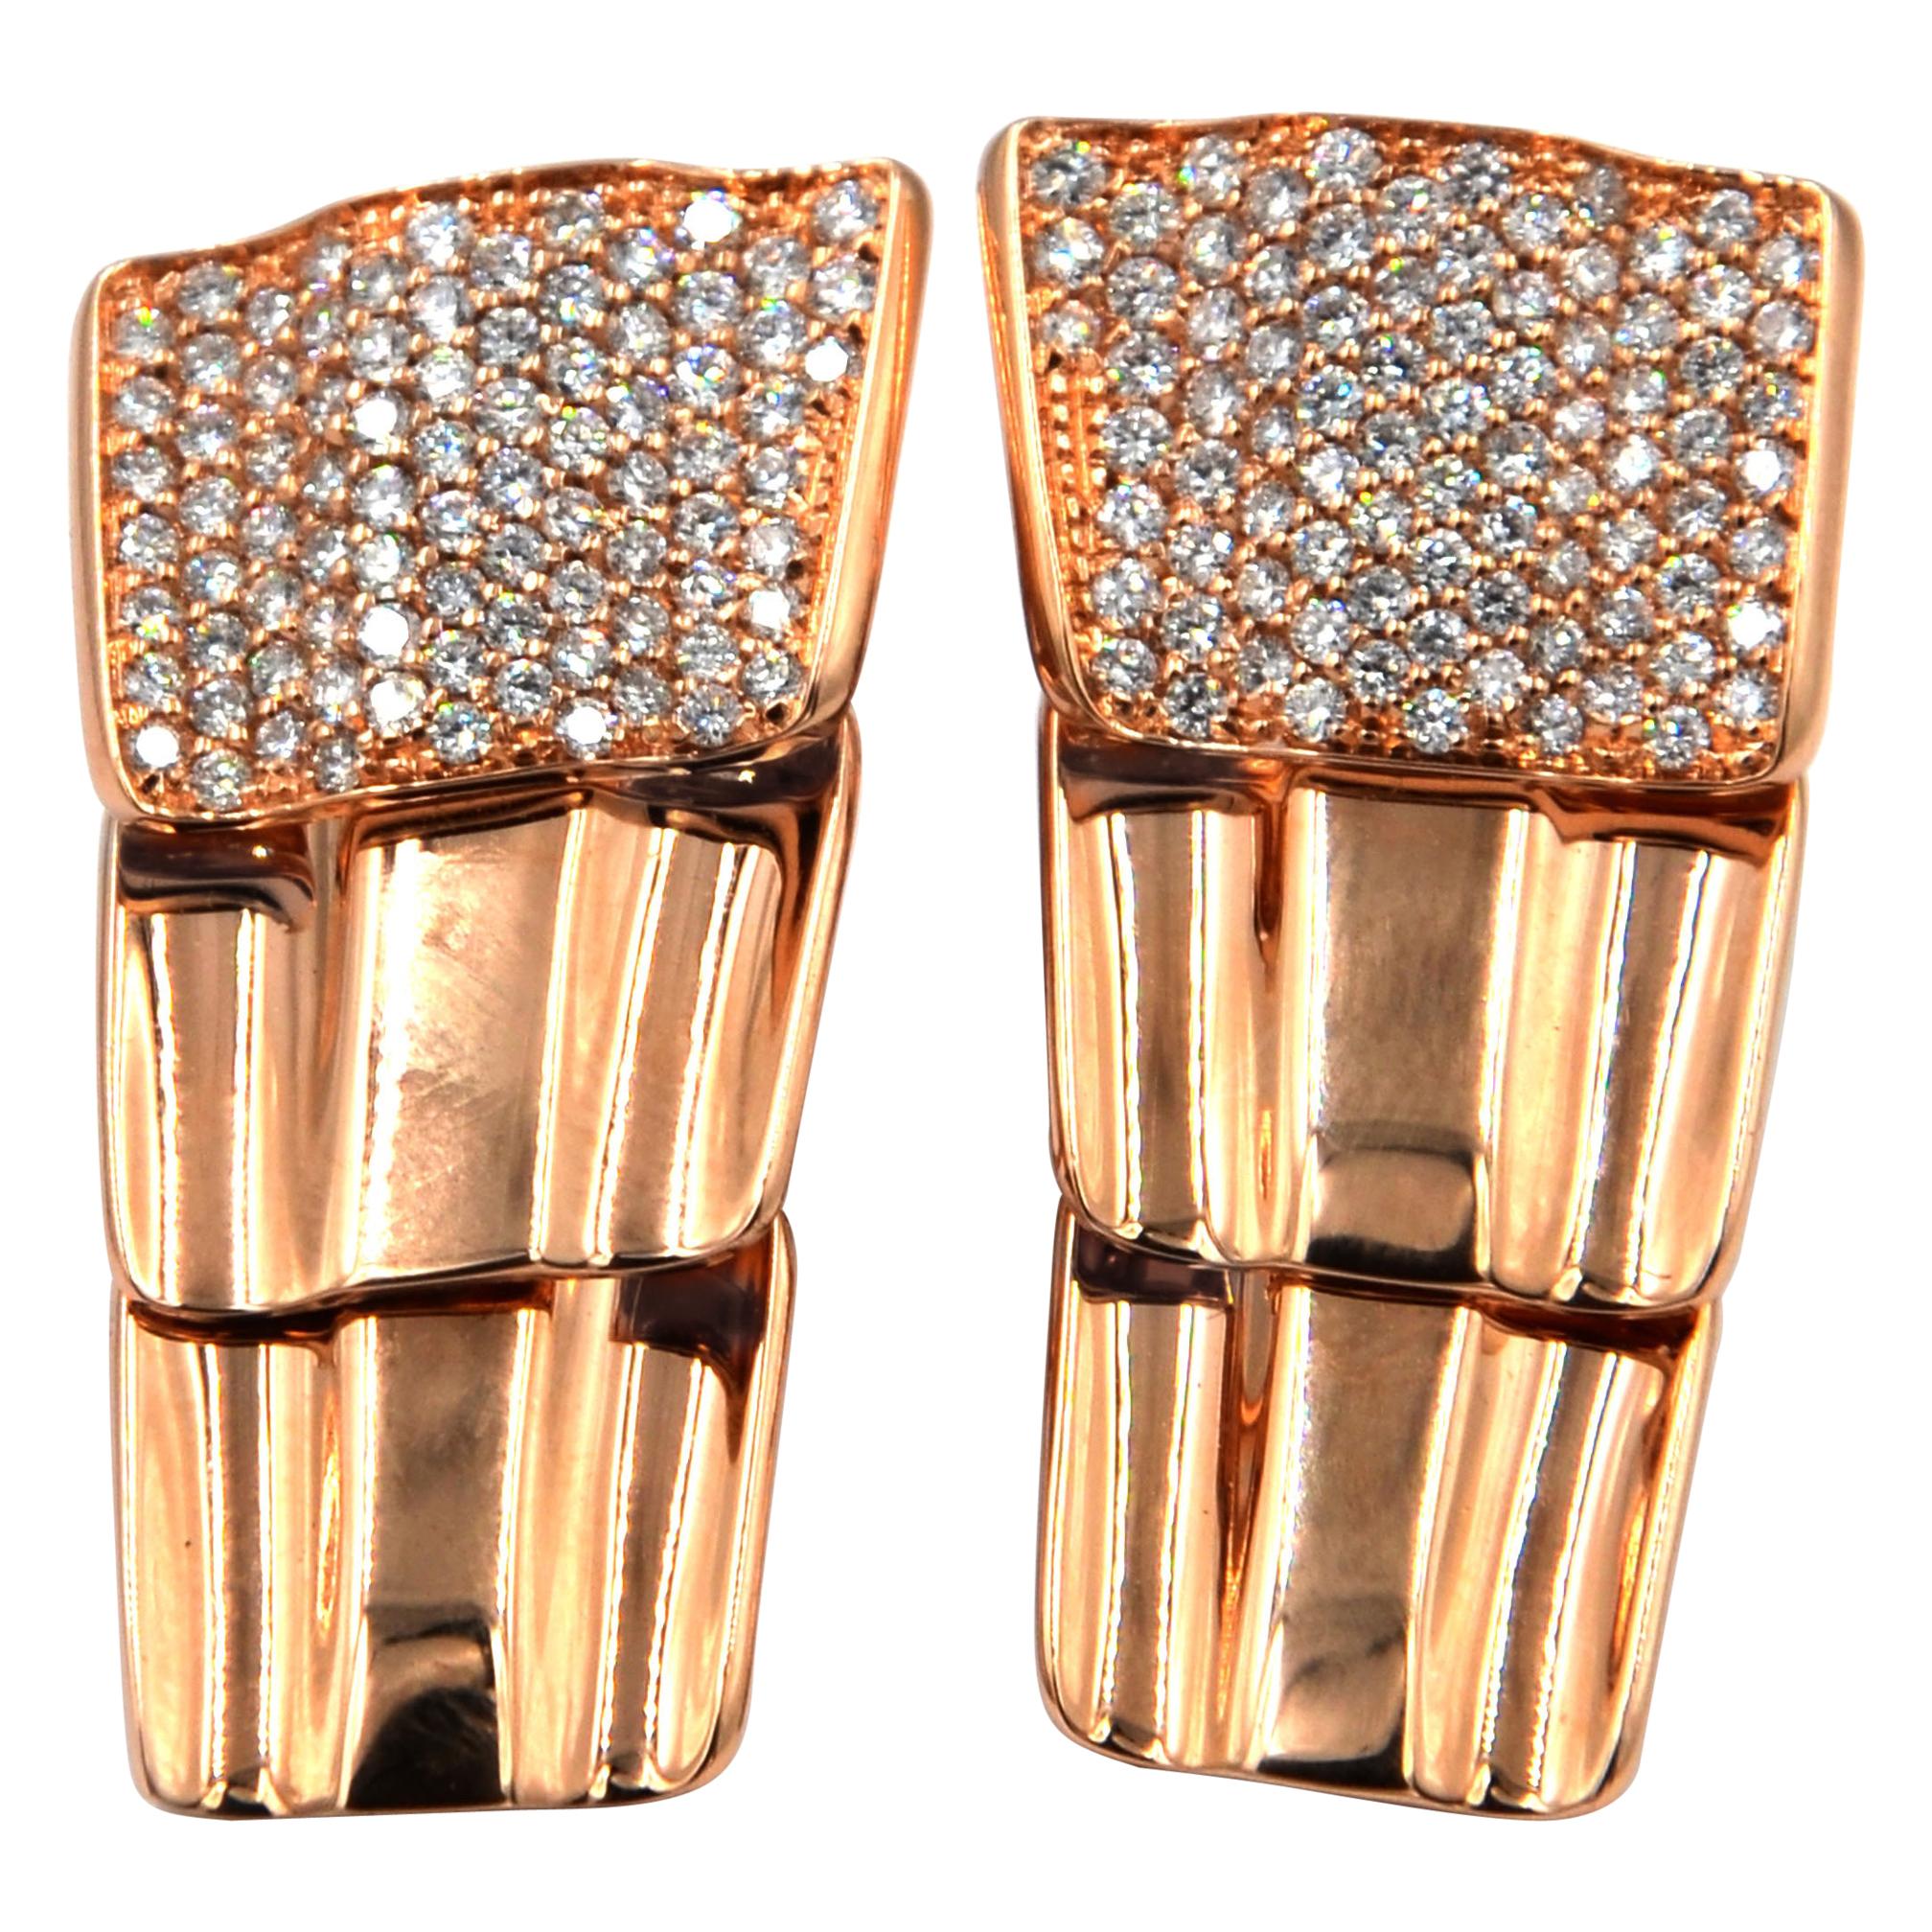 Garavelli 18 Karat Rose Gold Diamond Drago Collection Earrings
18kt GOLD  : gr 15.14
WHITE DIAMONDS ct :1.55
Made in Italy. Ask for the matching bracelet, ring and necklace